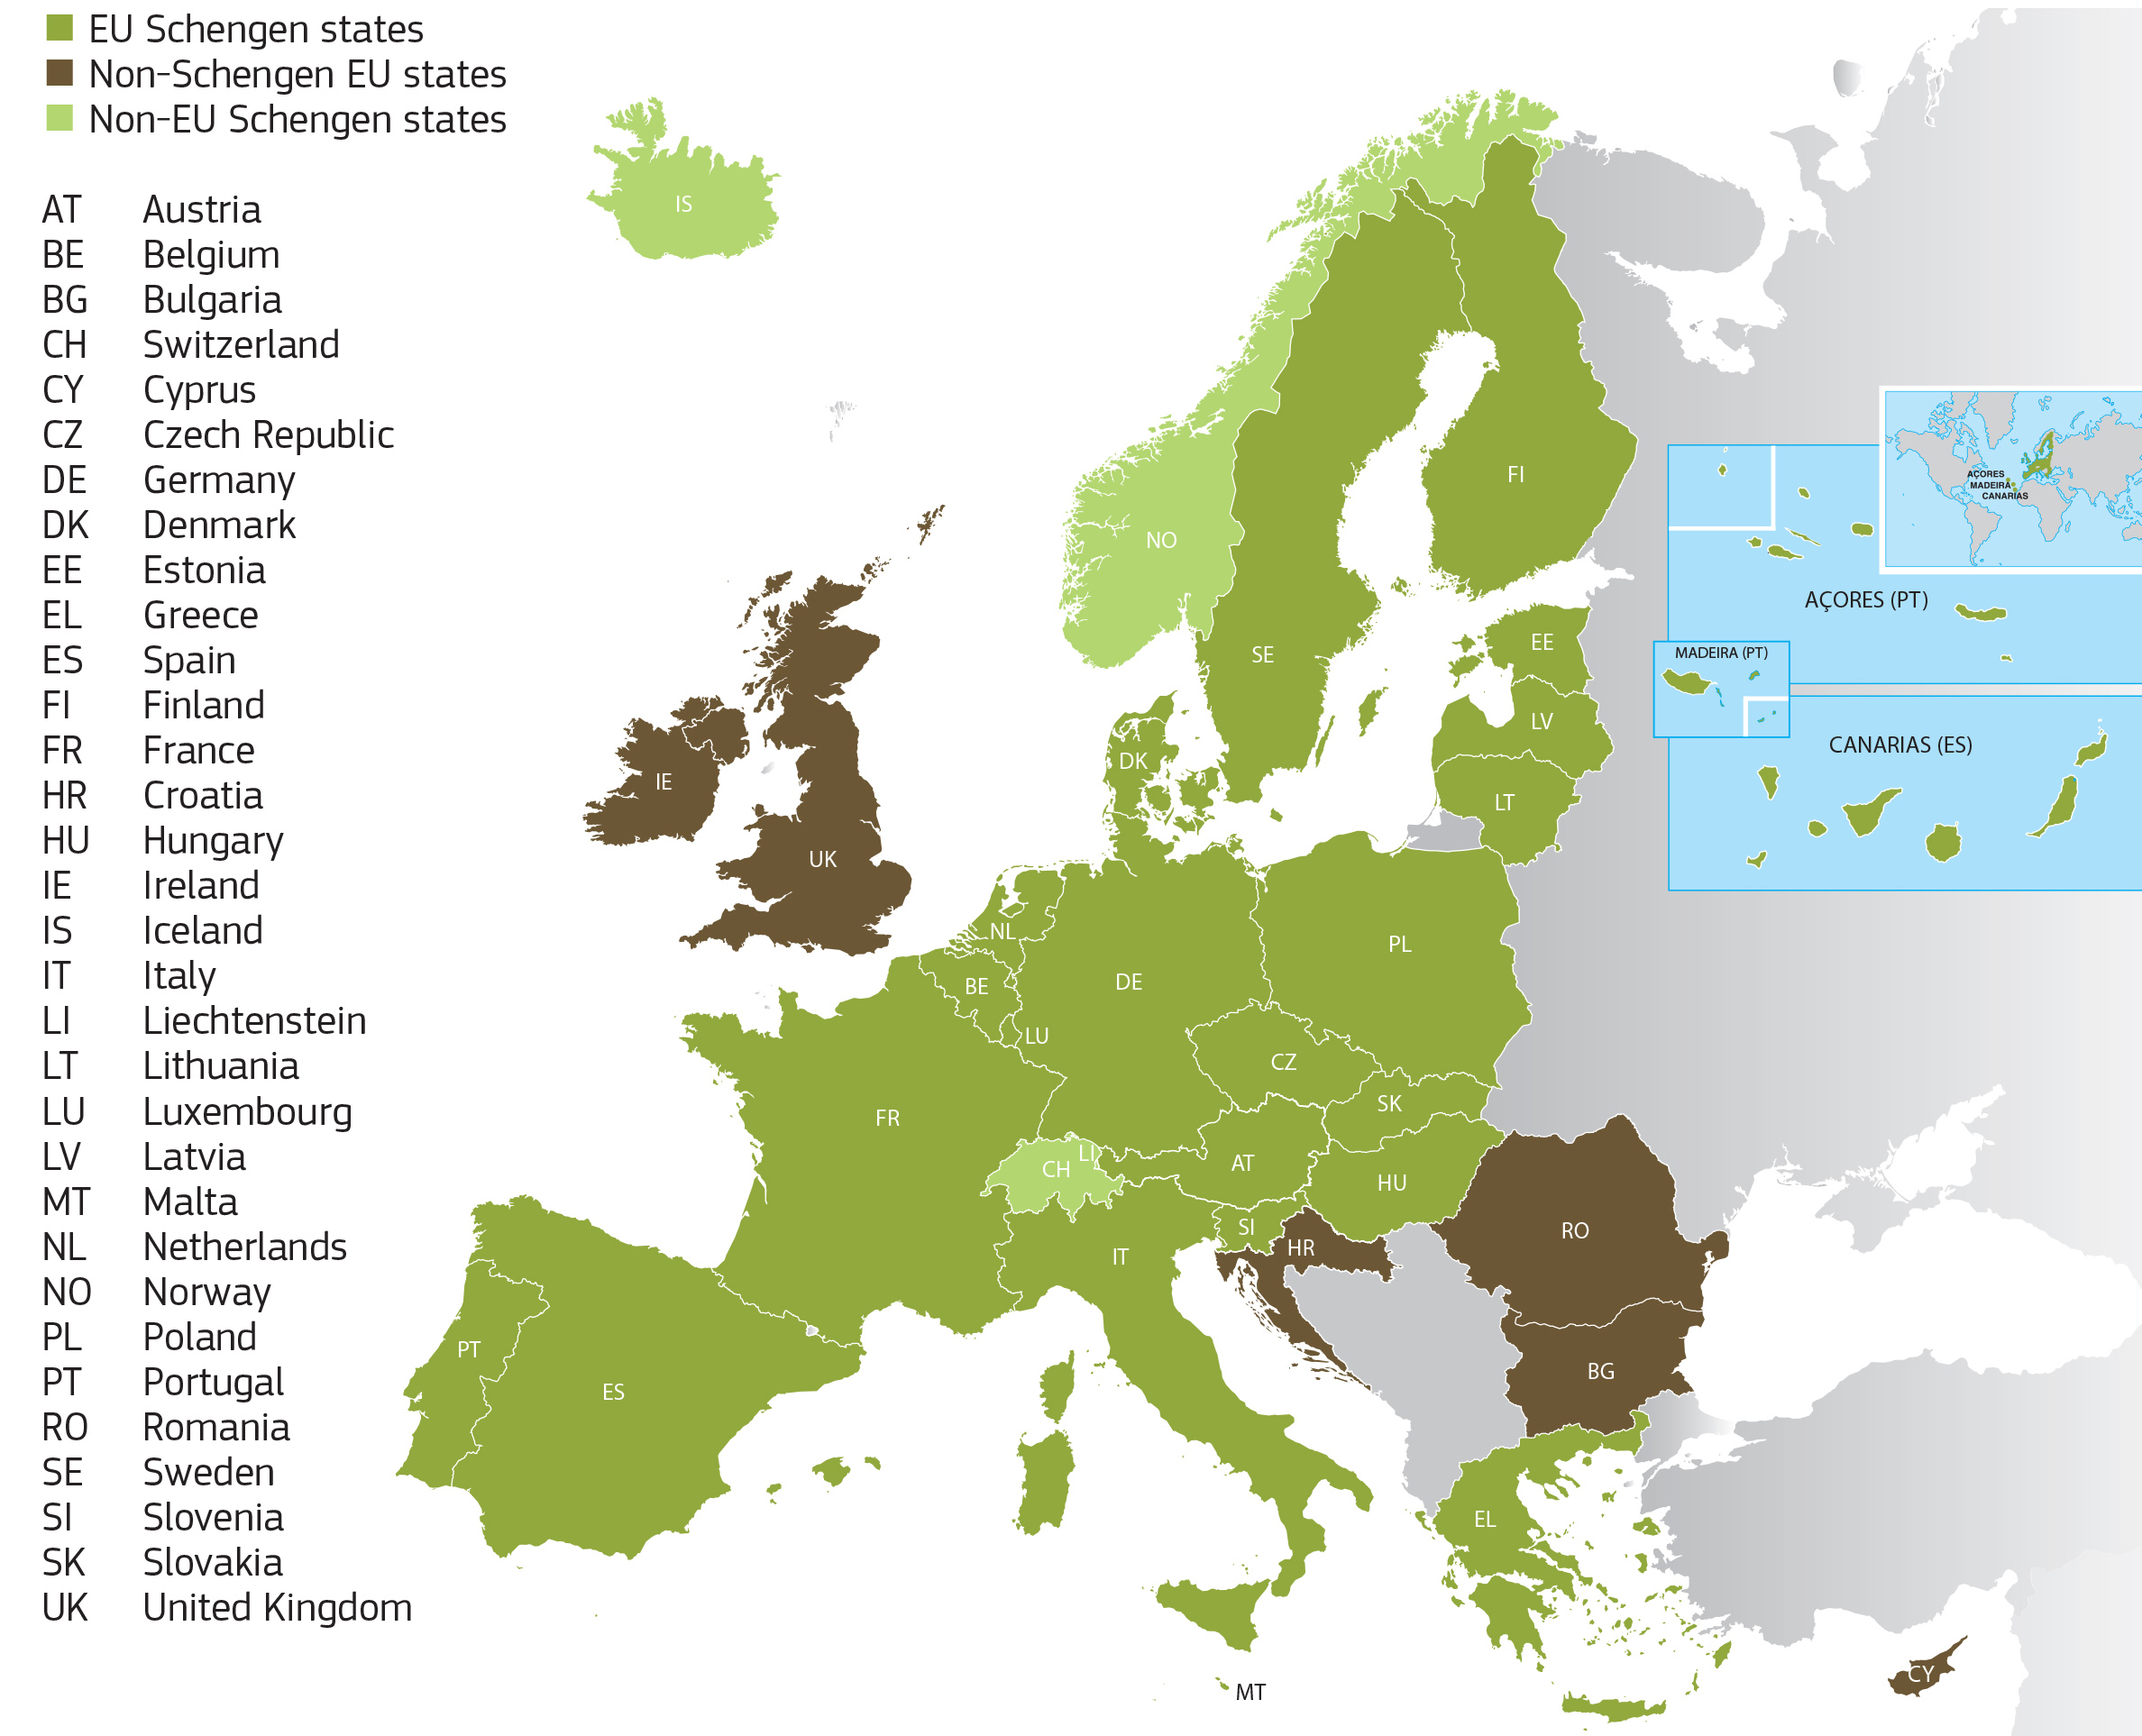 This map shows the countries both in the EU and Schengen in dark green. Countries in lighter green are not in the EU but in the Schengen Agreement.